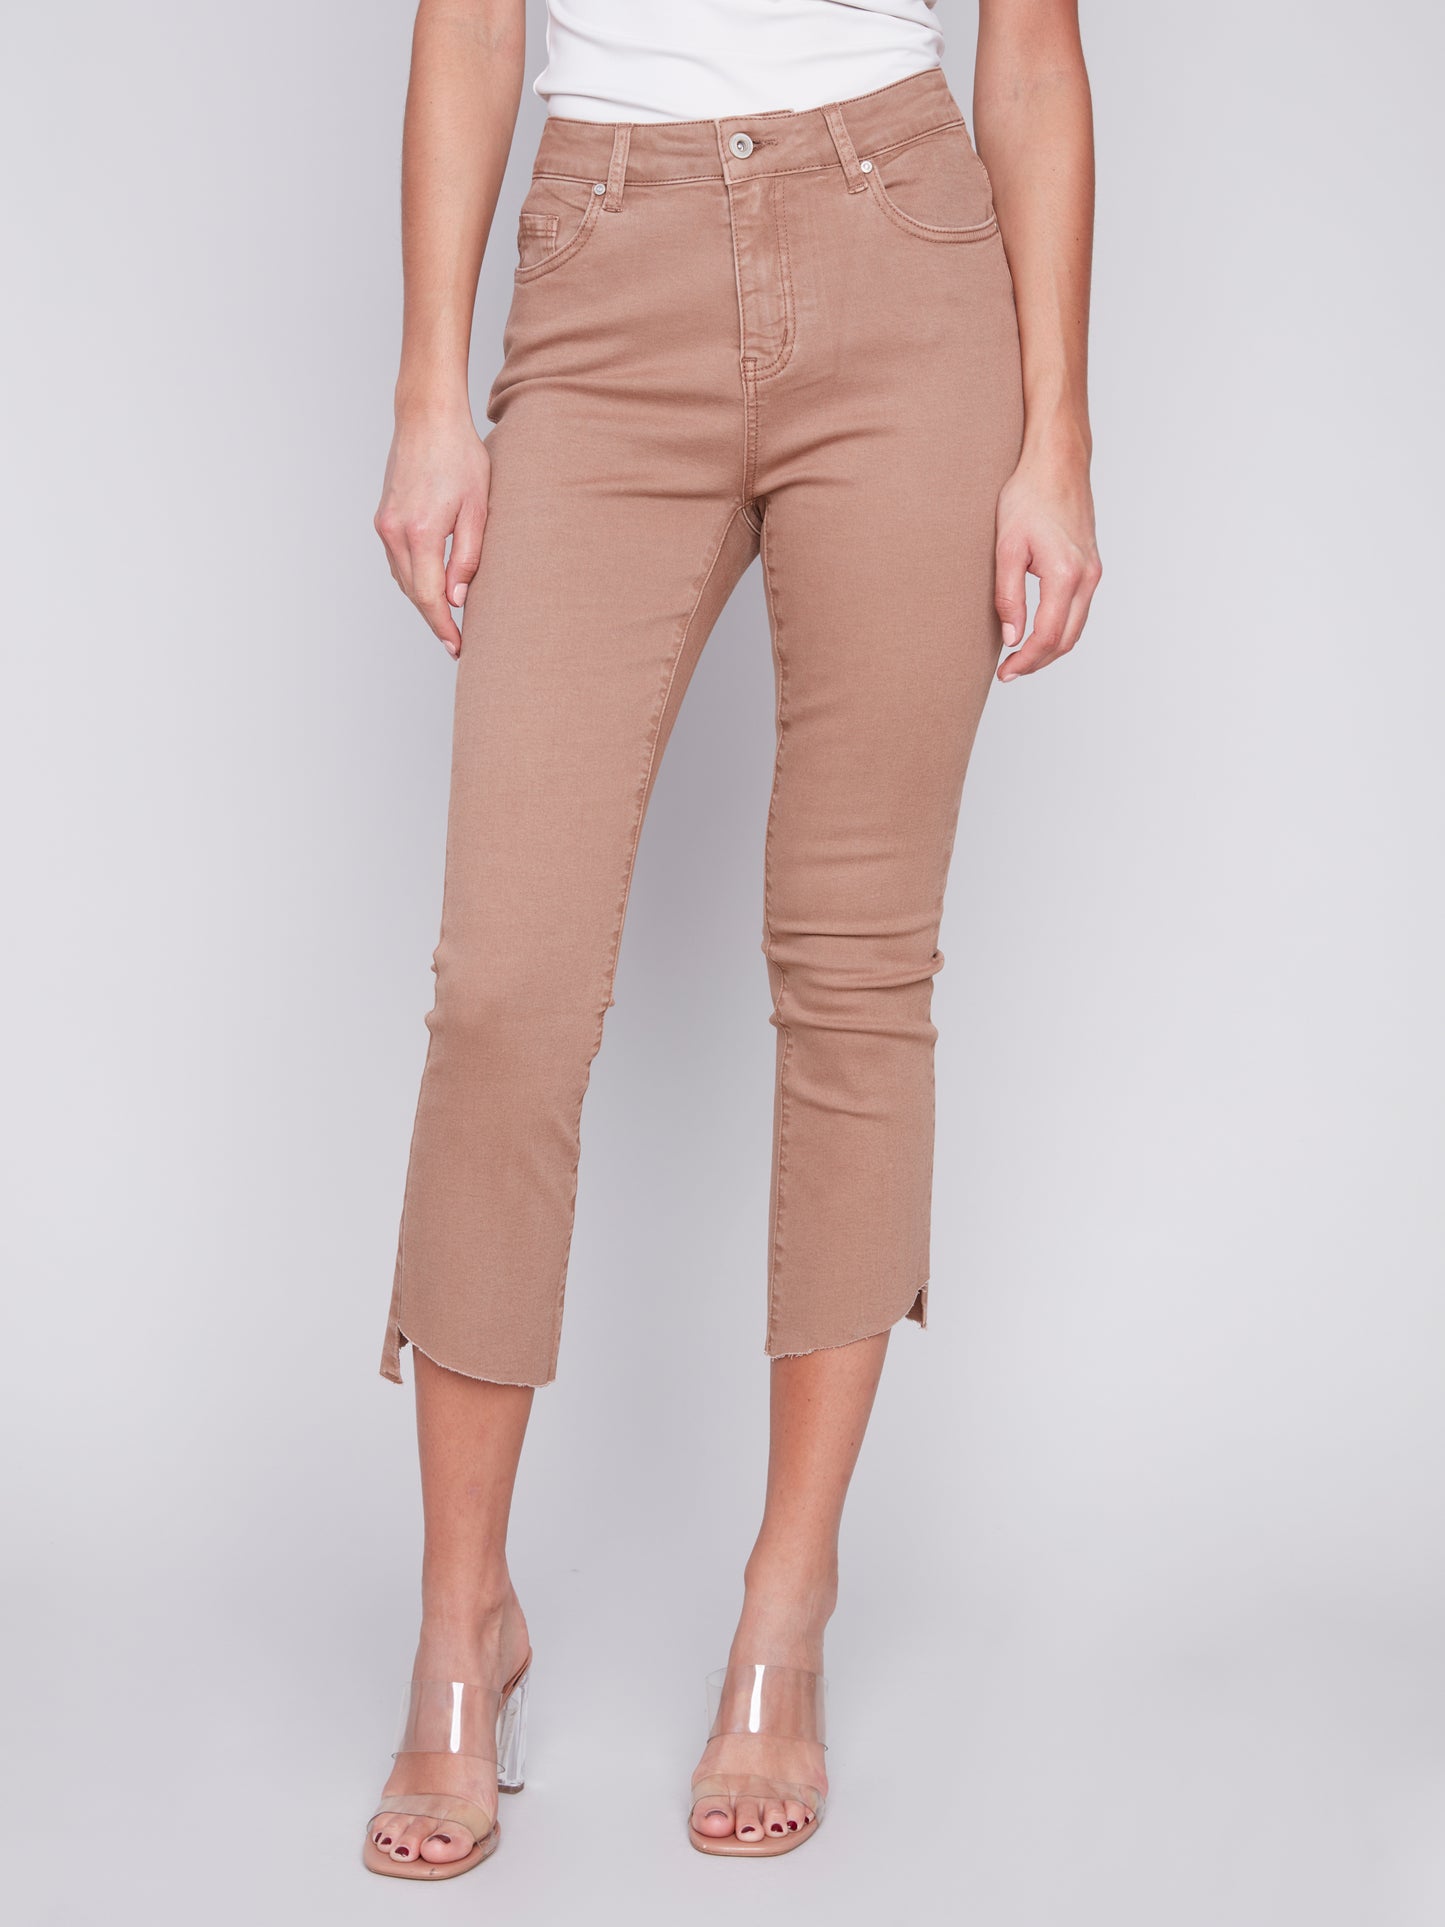 Caramel Pant with Raw Edge By Charlie B